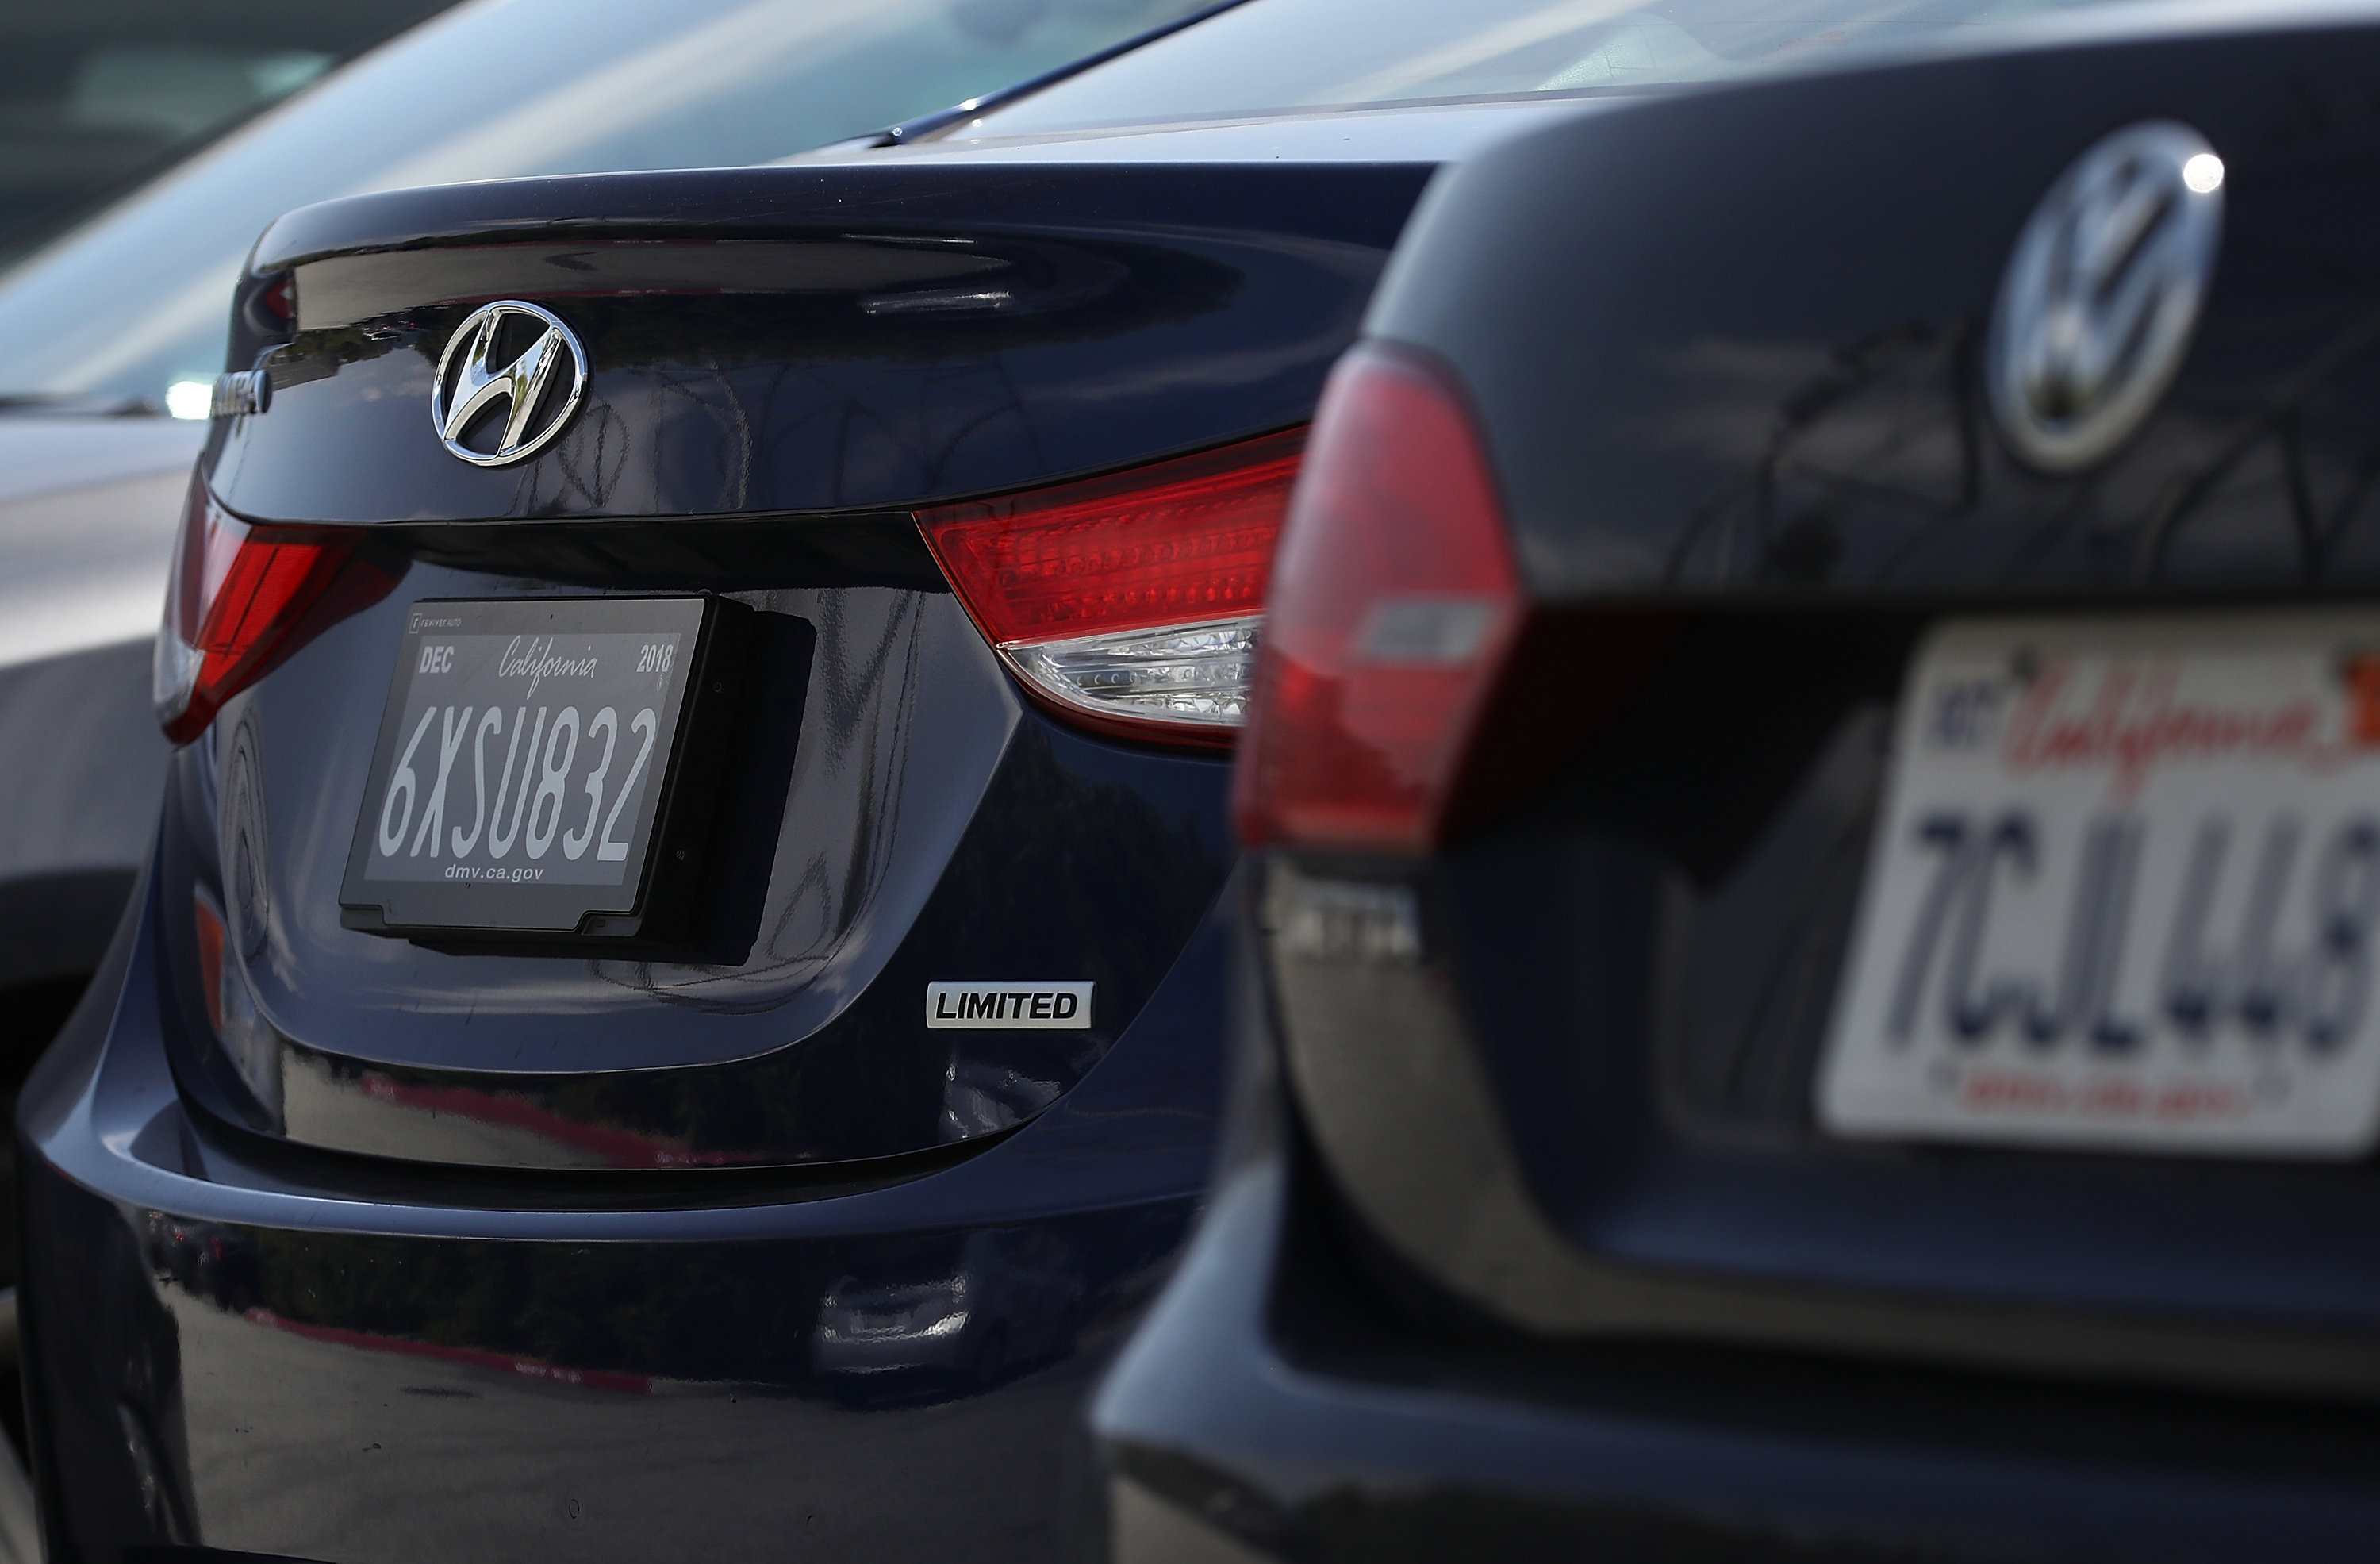 San Francisco Wants to Eliminate Illegal License Plate Covers